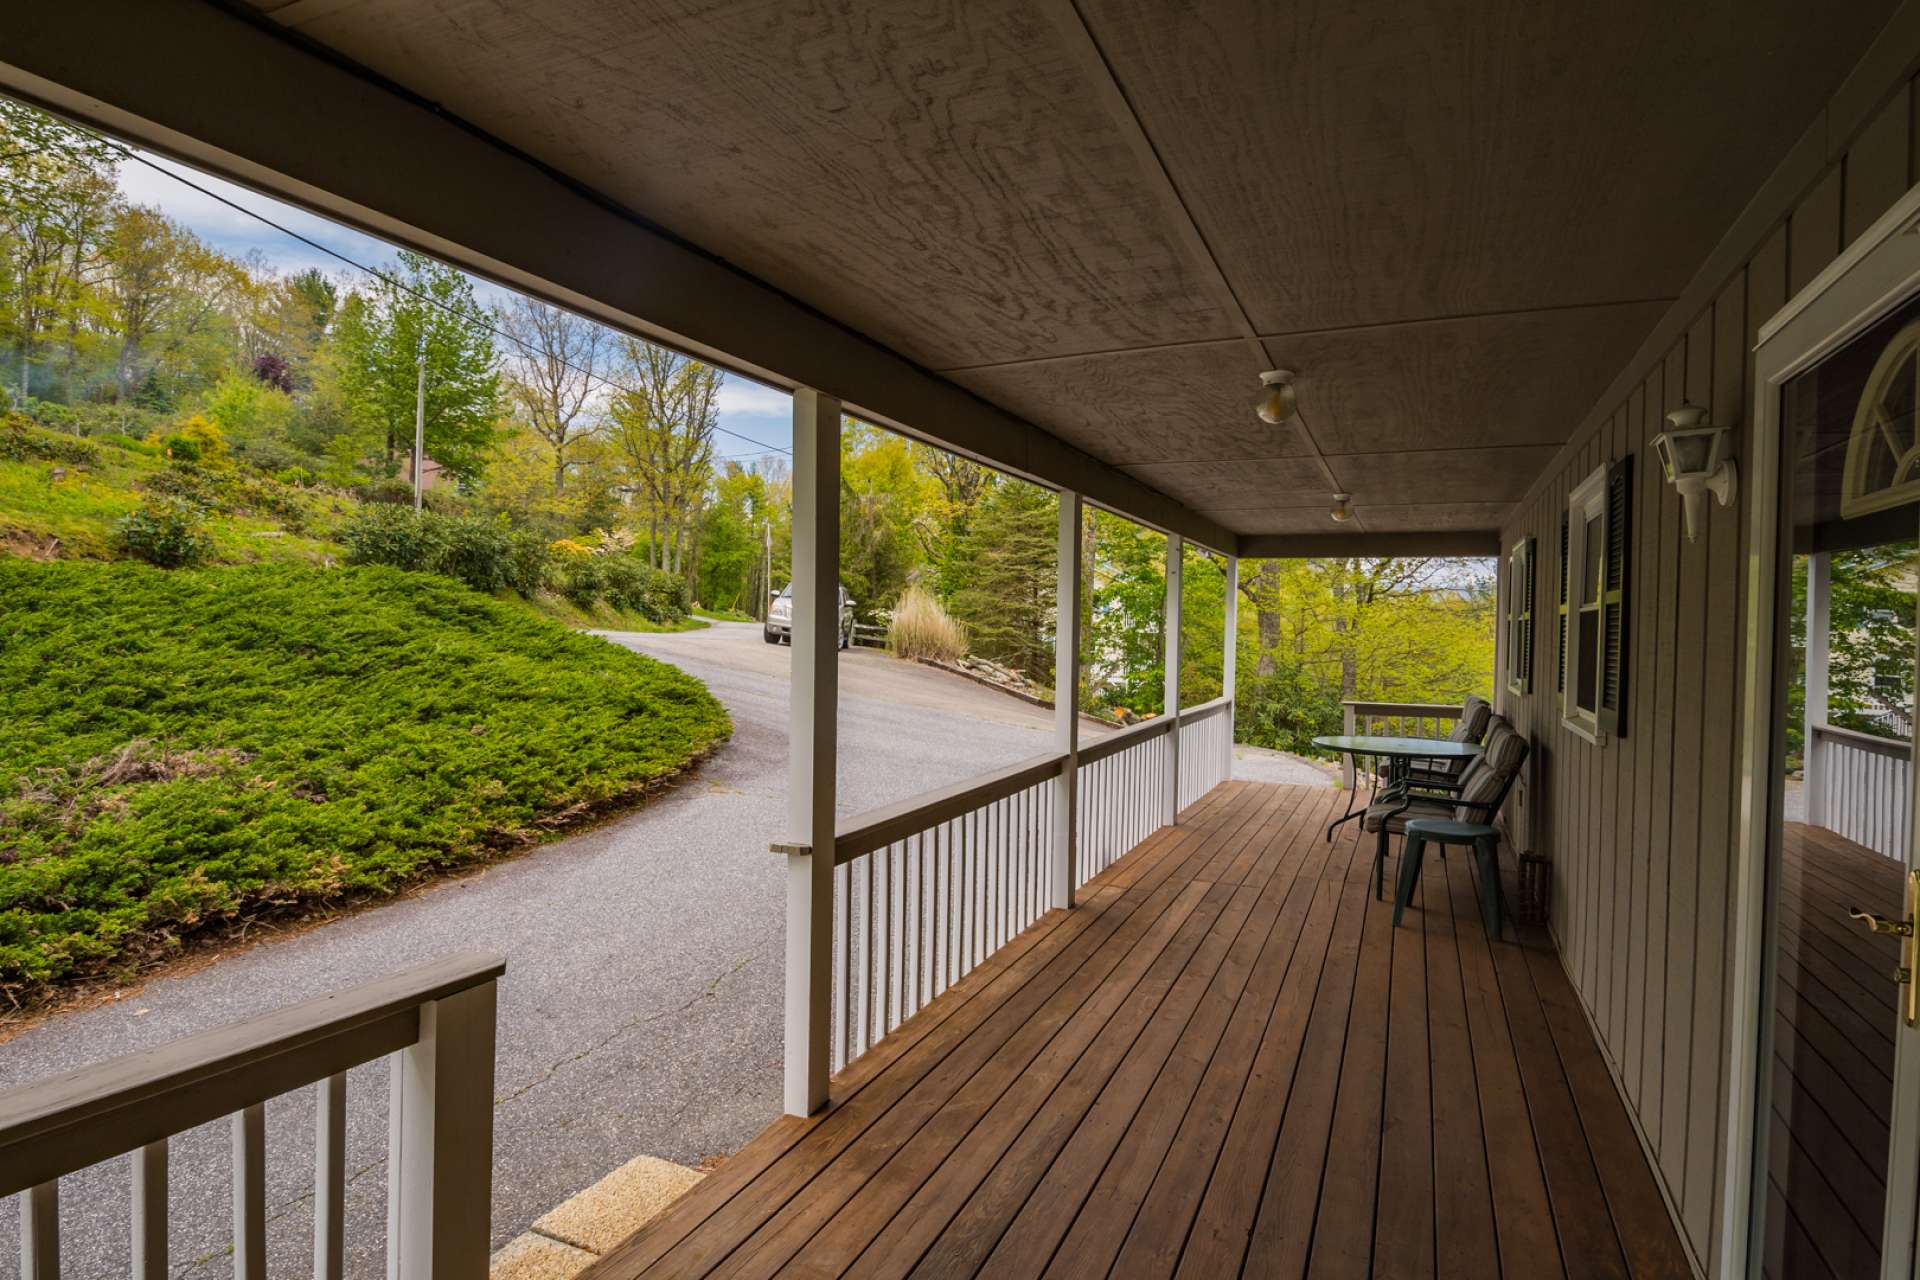 A full length covered front porch welcomes all  who enter and beckons you to savor the beauty and sounds of the mountains.